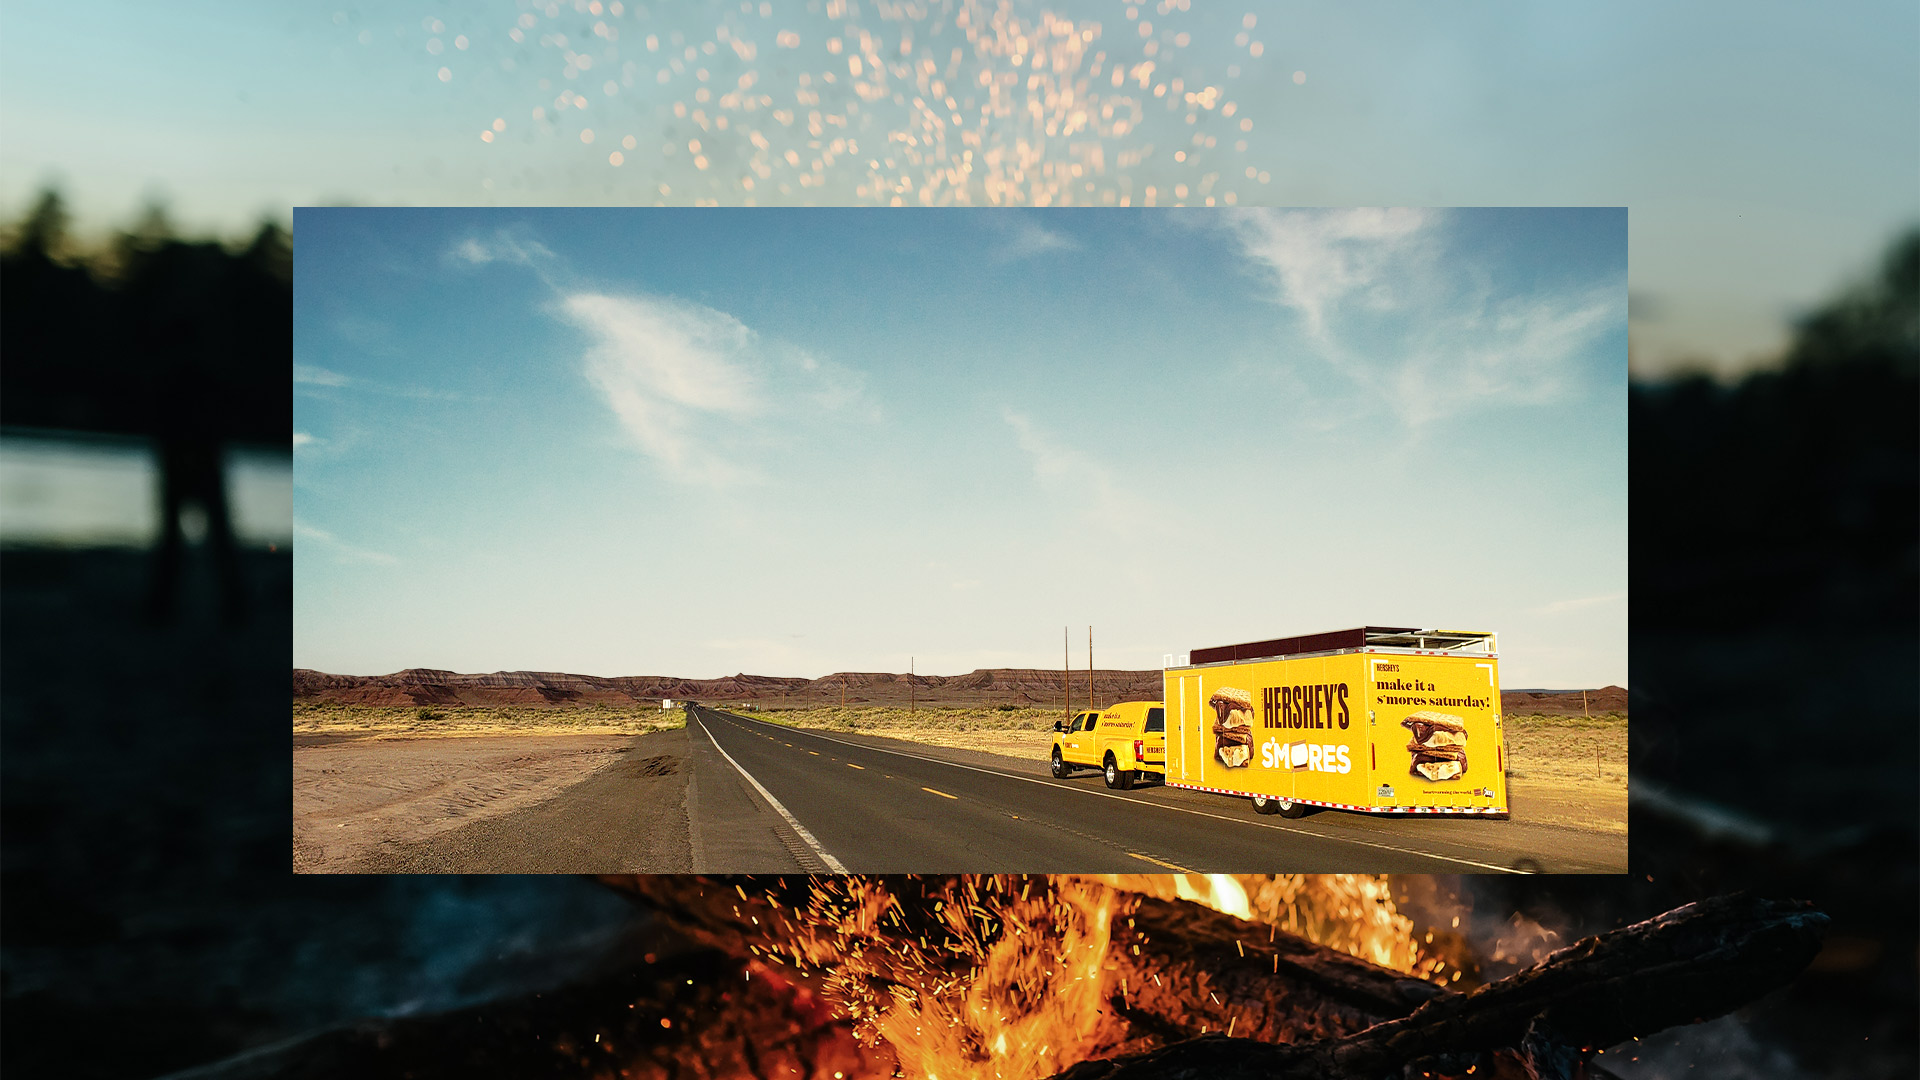 Hershey's S'mores yellow branded trailer driving down the open road